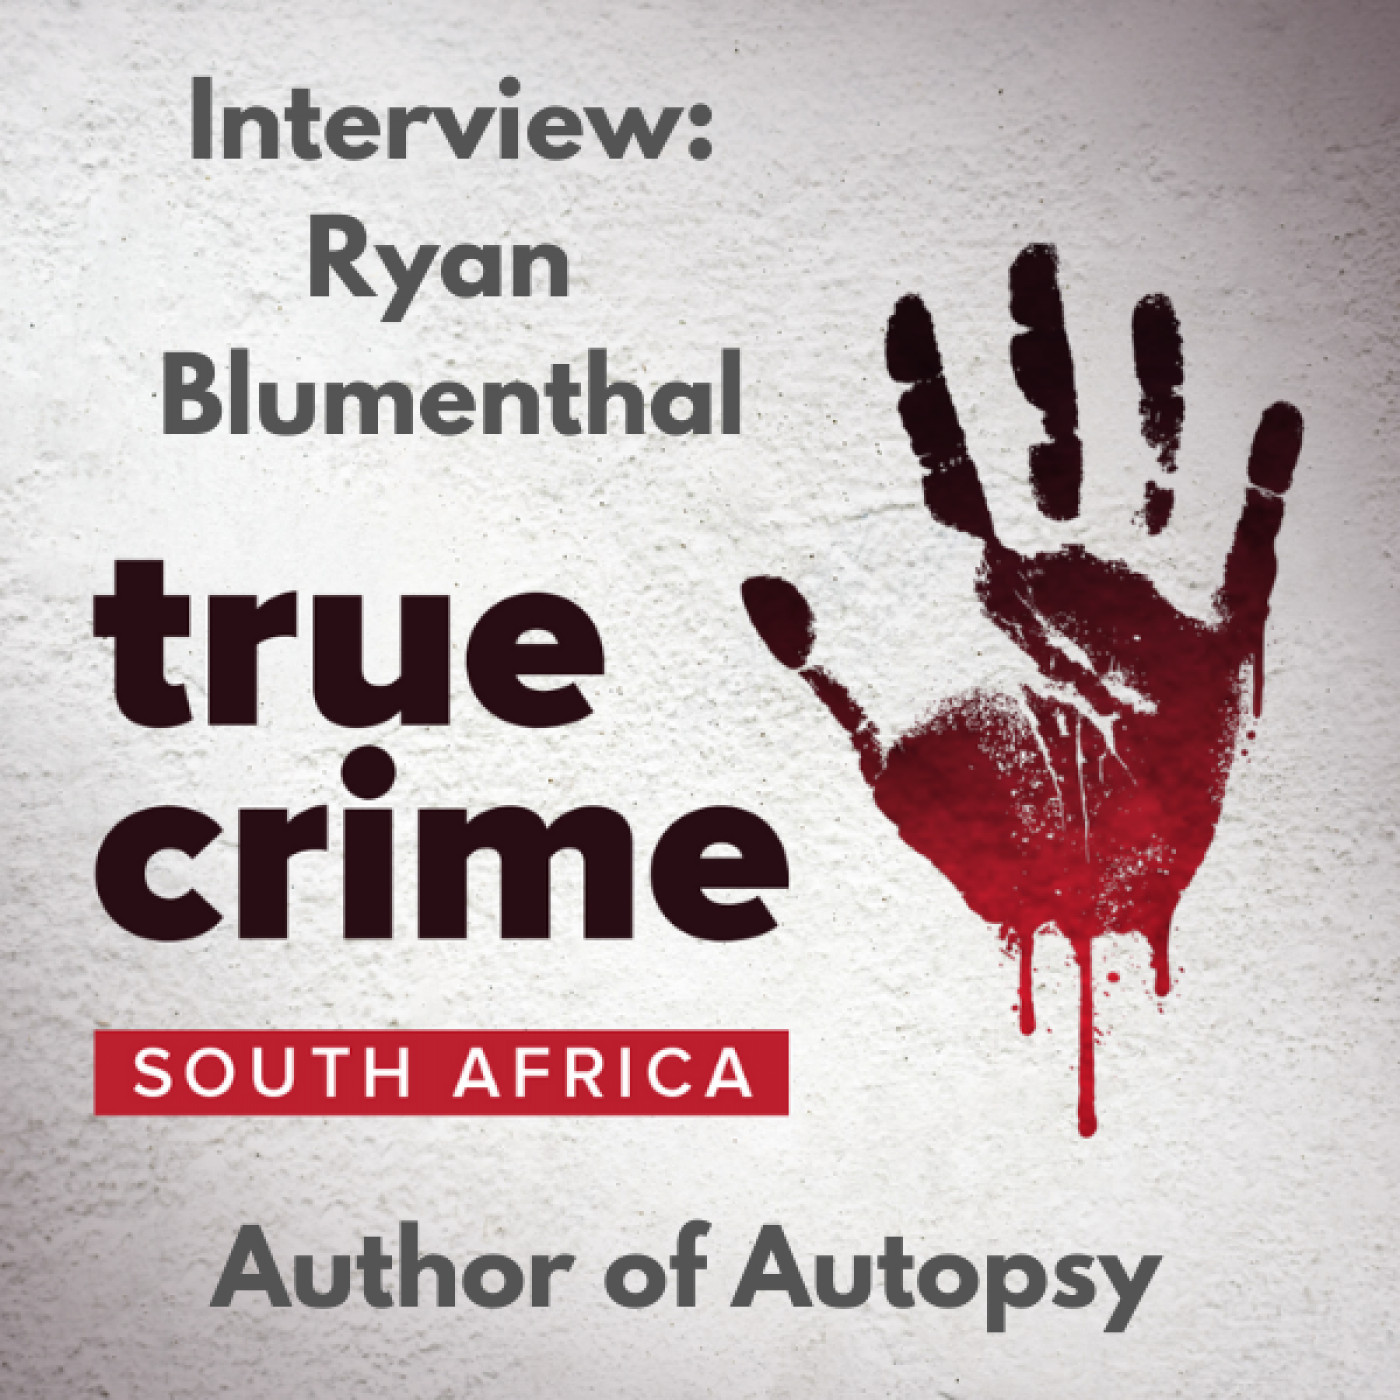 Interview: Ryan Blumenthal - Author of Autopsy